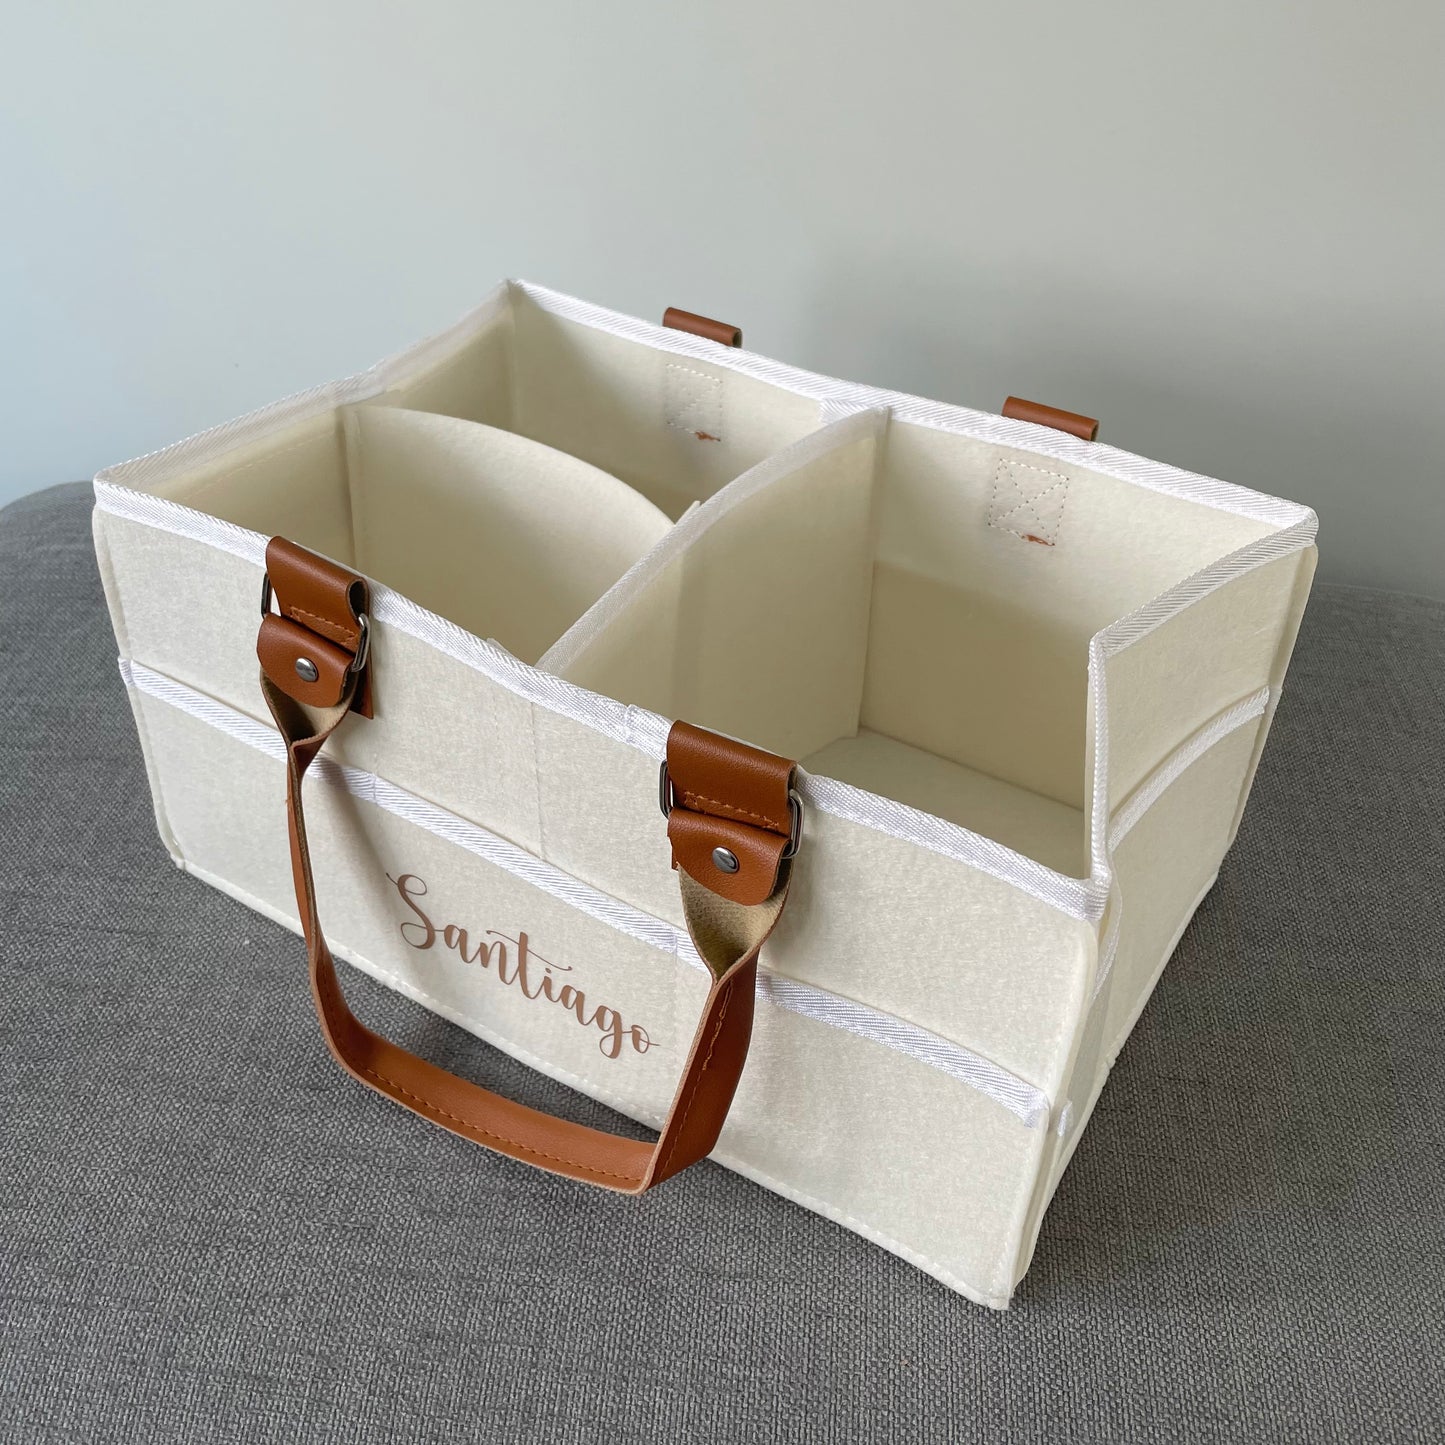 Personalised Felt With Brown Handles Nappy Changing Organiser Bag